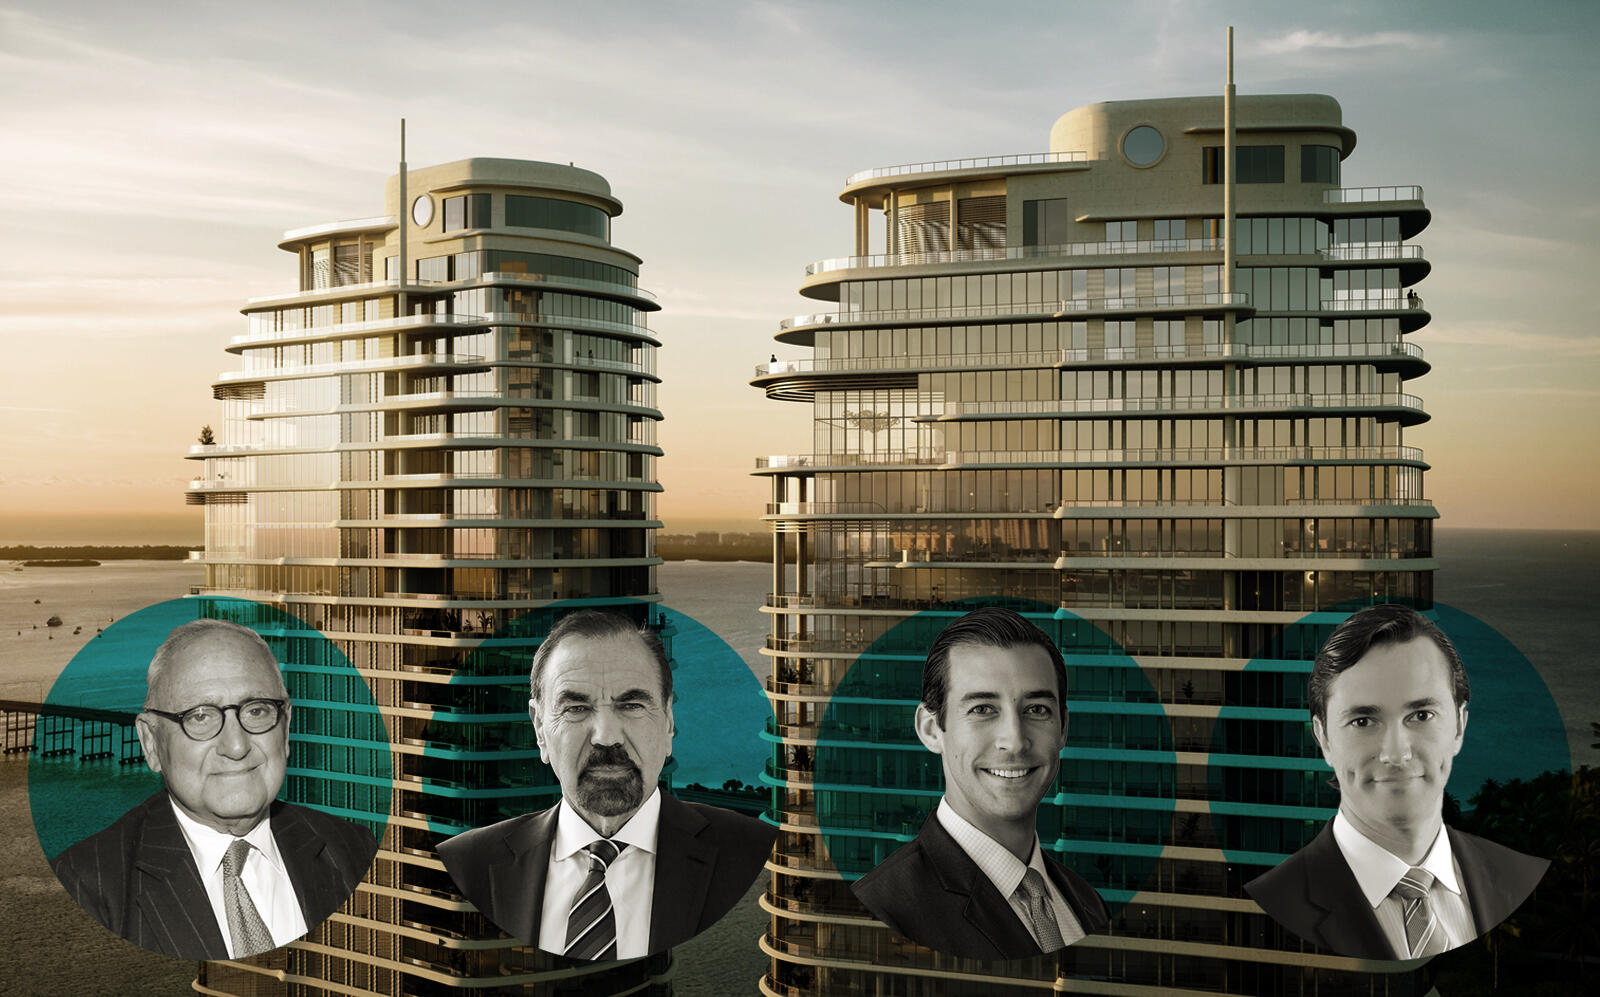 Rendering of the project with Robert A. M. Stern, Jorge Perez, Nick Perez and Nelson Stabile (1809 Brickell Venture, LLC, Binyan Studios, Getty, Integra)